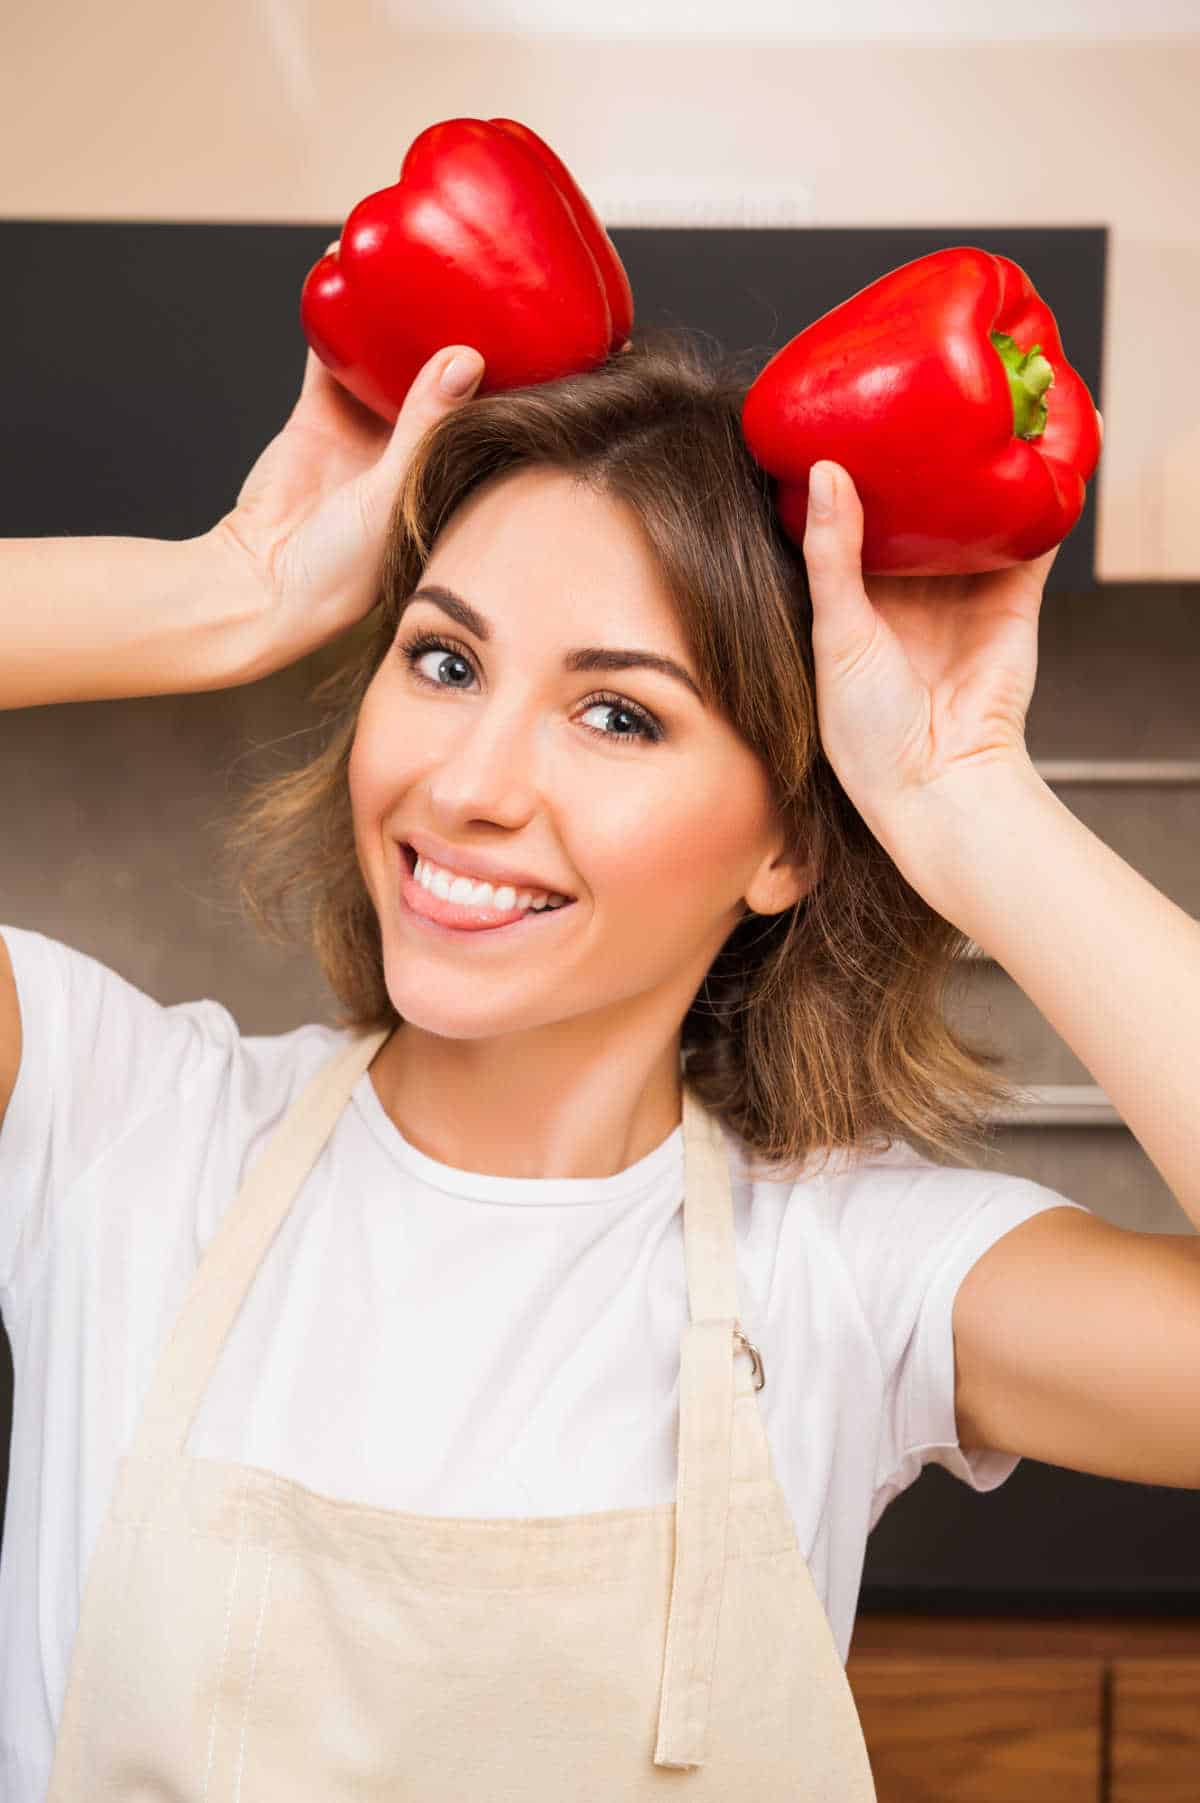 Woman holding bell peppers.